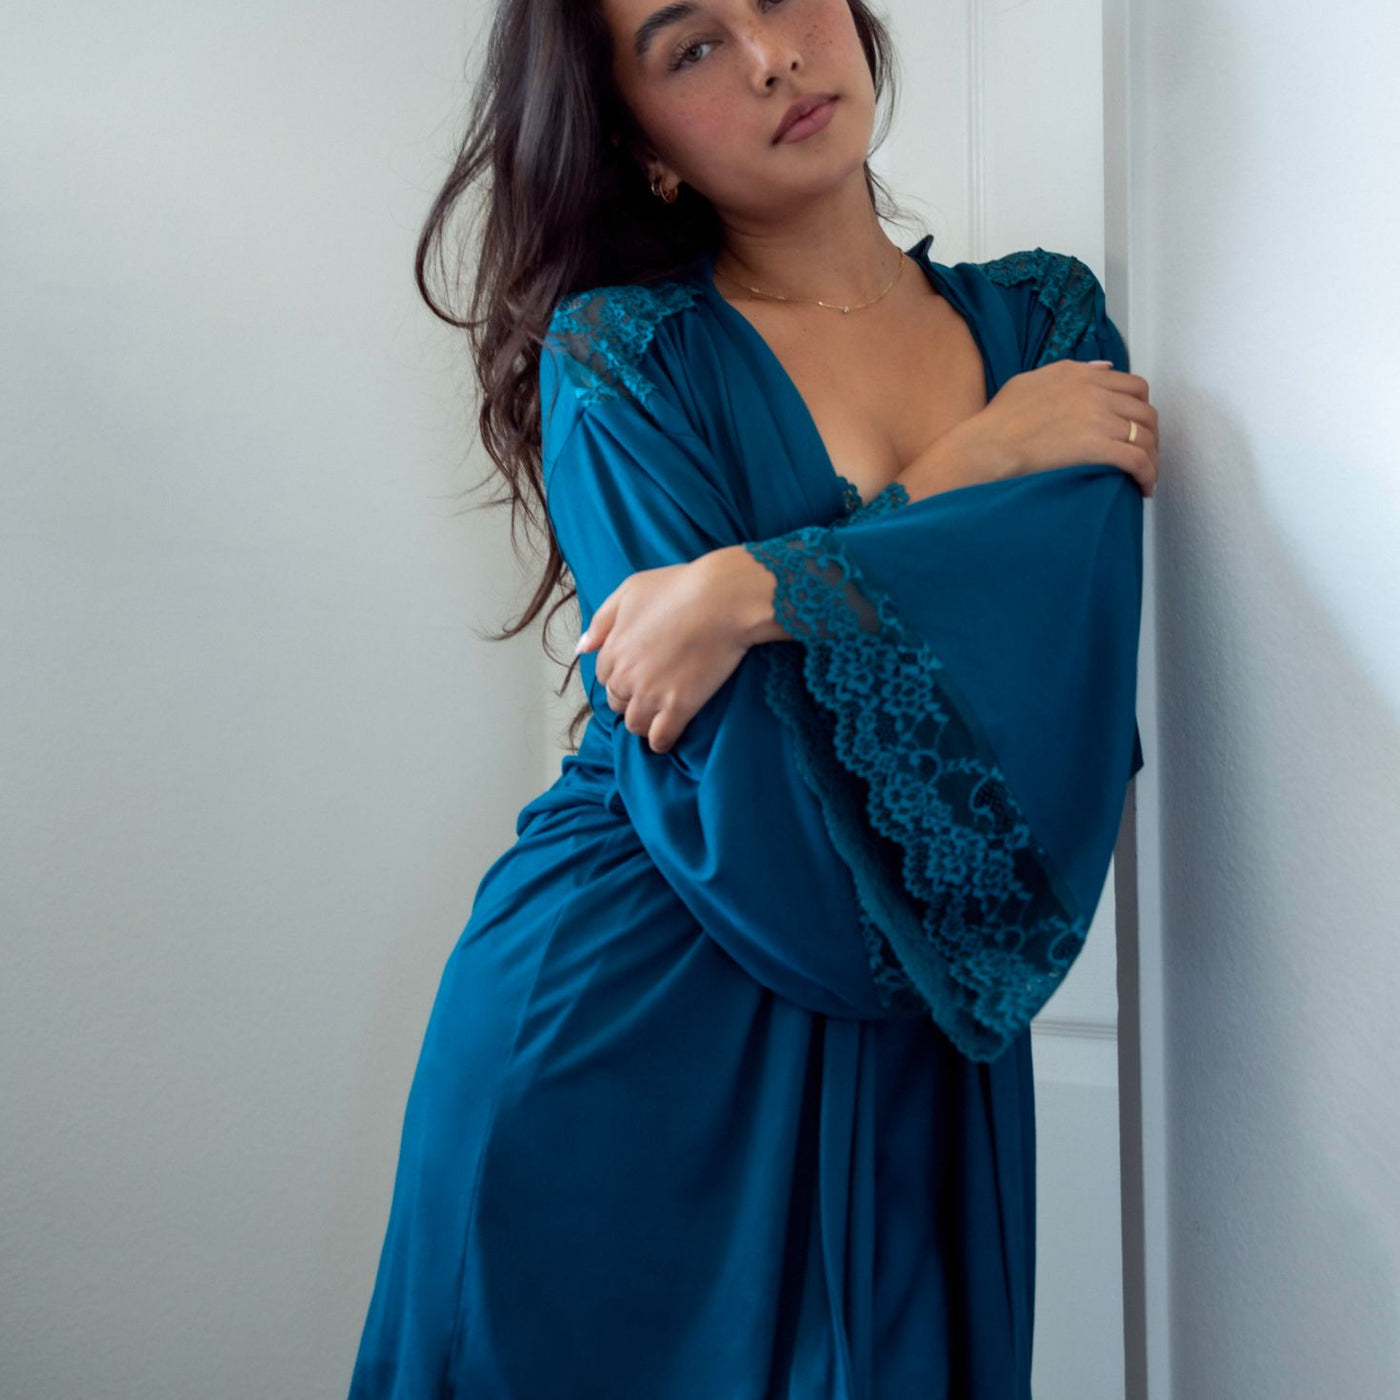 Jonquil Aegean Sea Wrap AGS030 in Deep Teal-Robes-Jonquil in Bloom-Deep Teal-XSmall/Small-Anna Bella Fine Lingerie, Reveal Your Most Gorgeous Self!